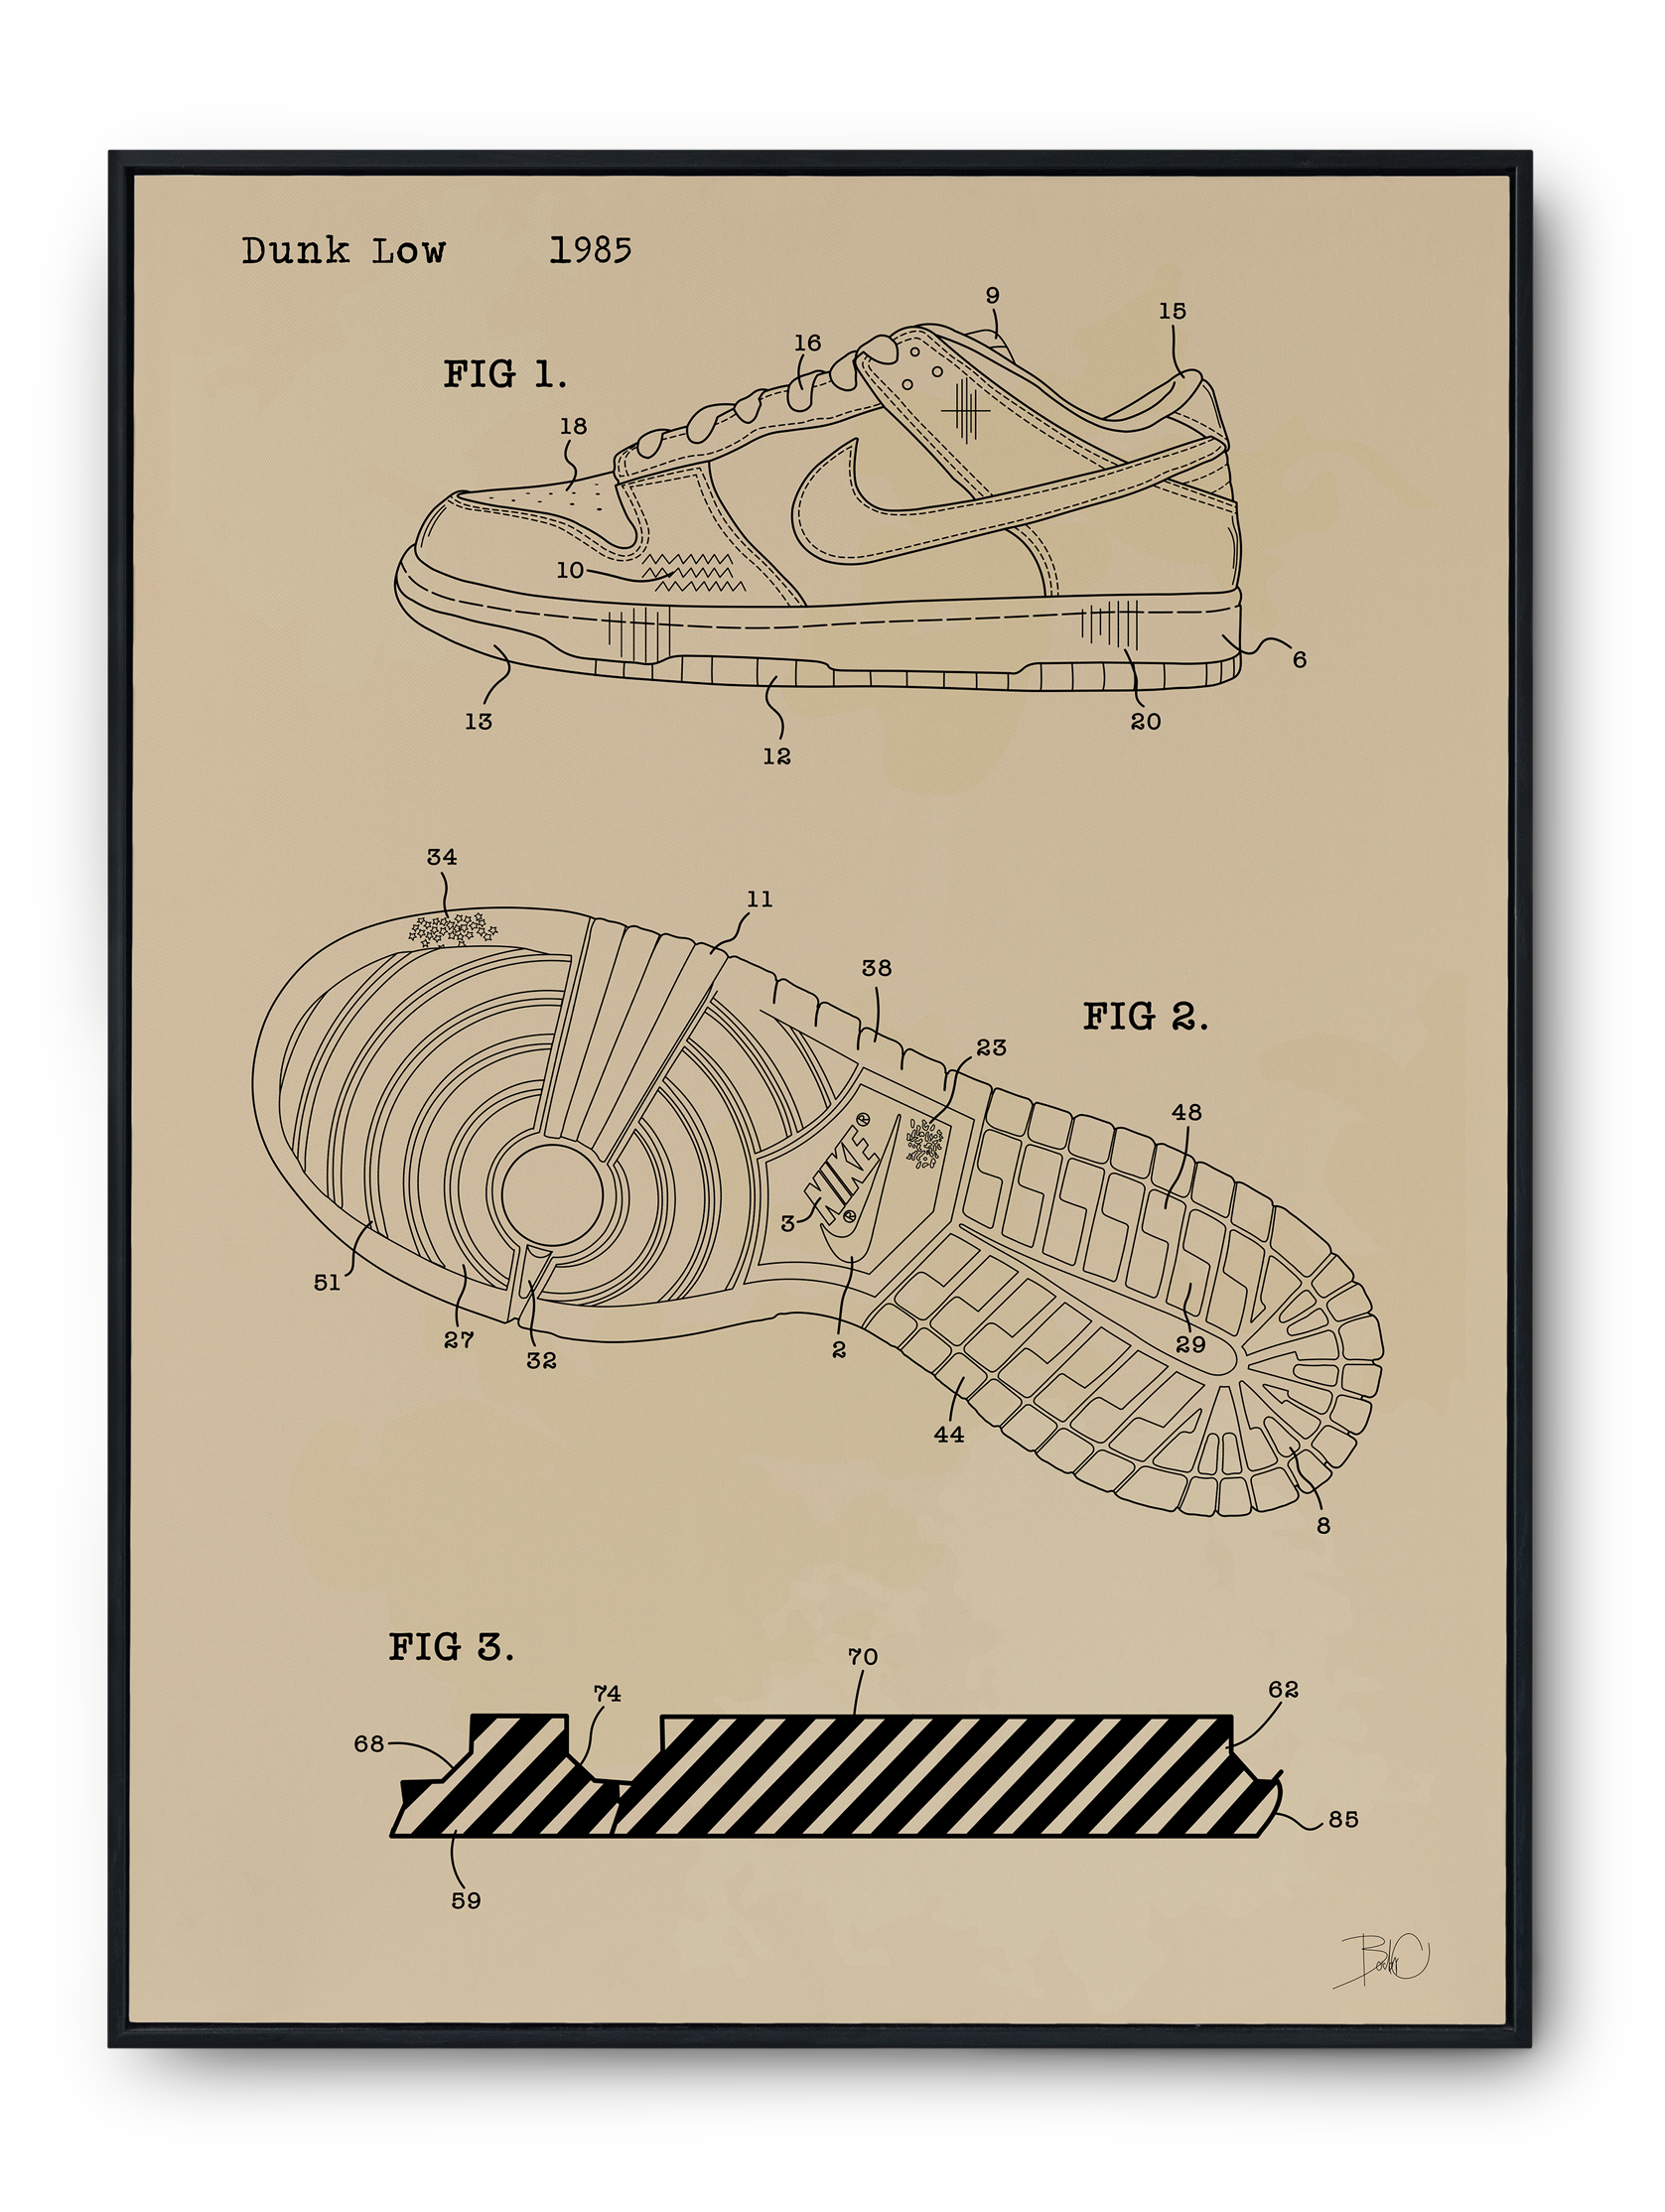 "THE DUNK LOW" Prototype Poster Series